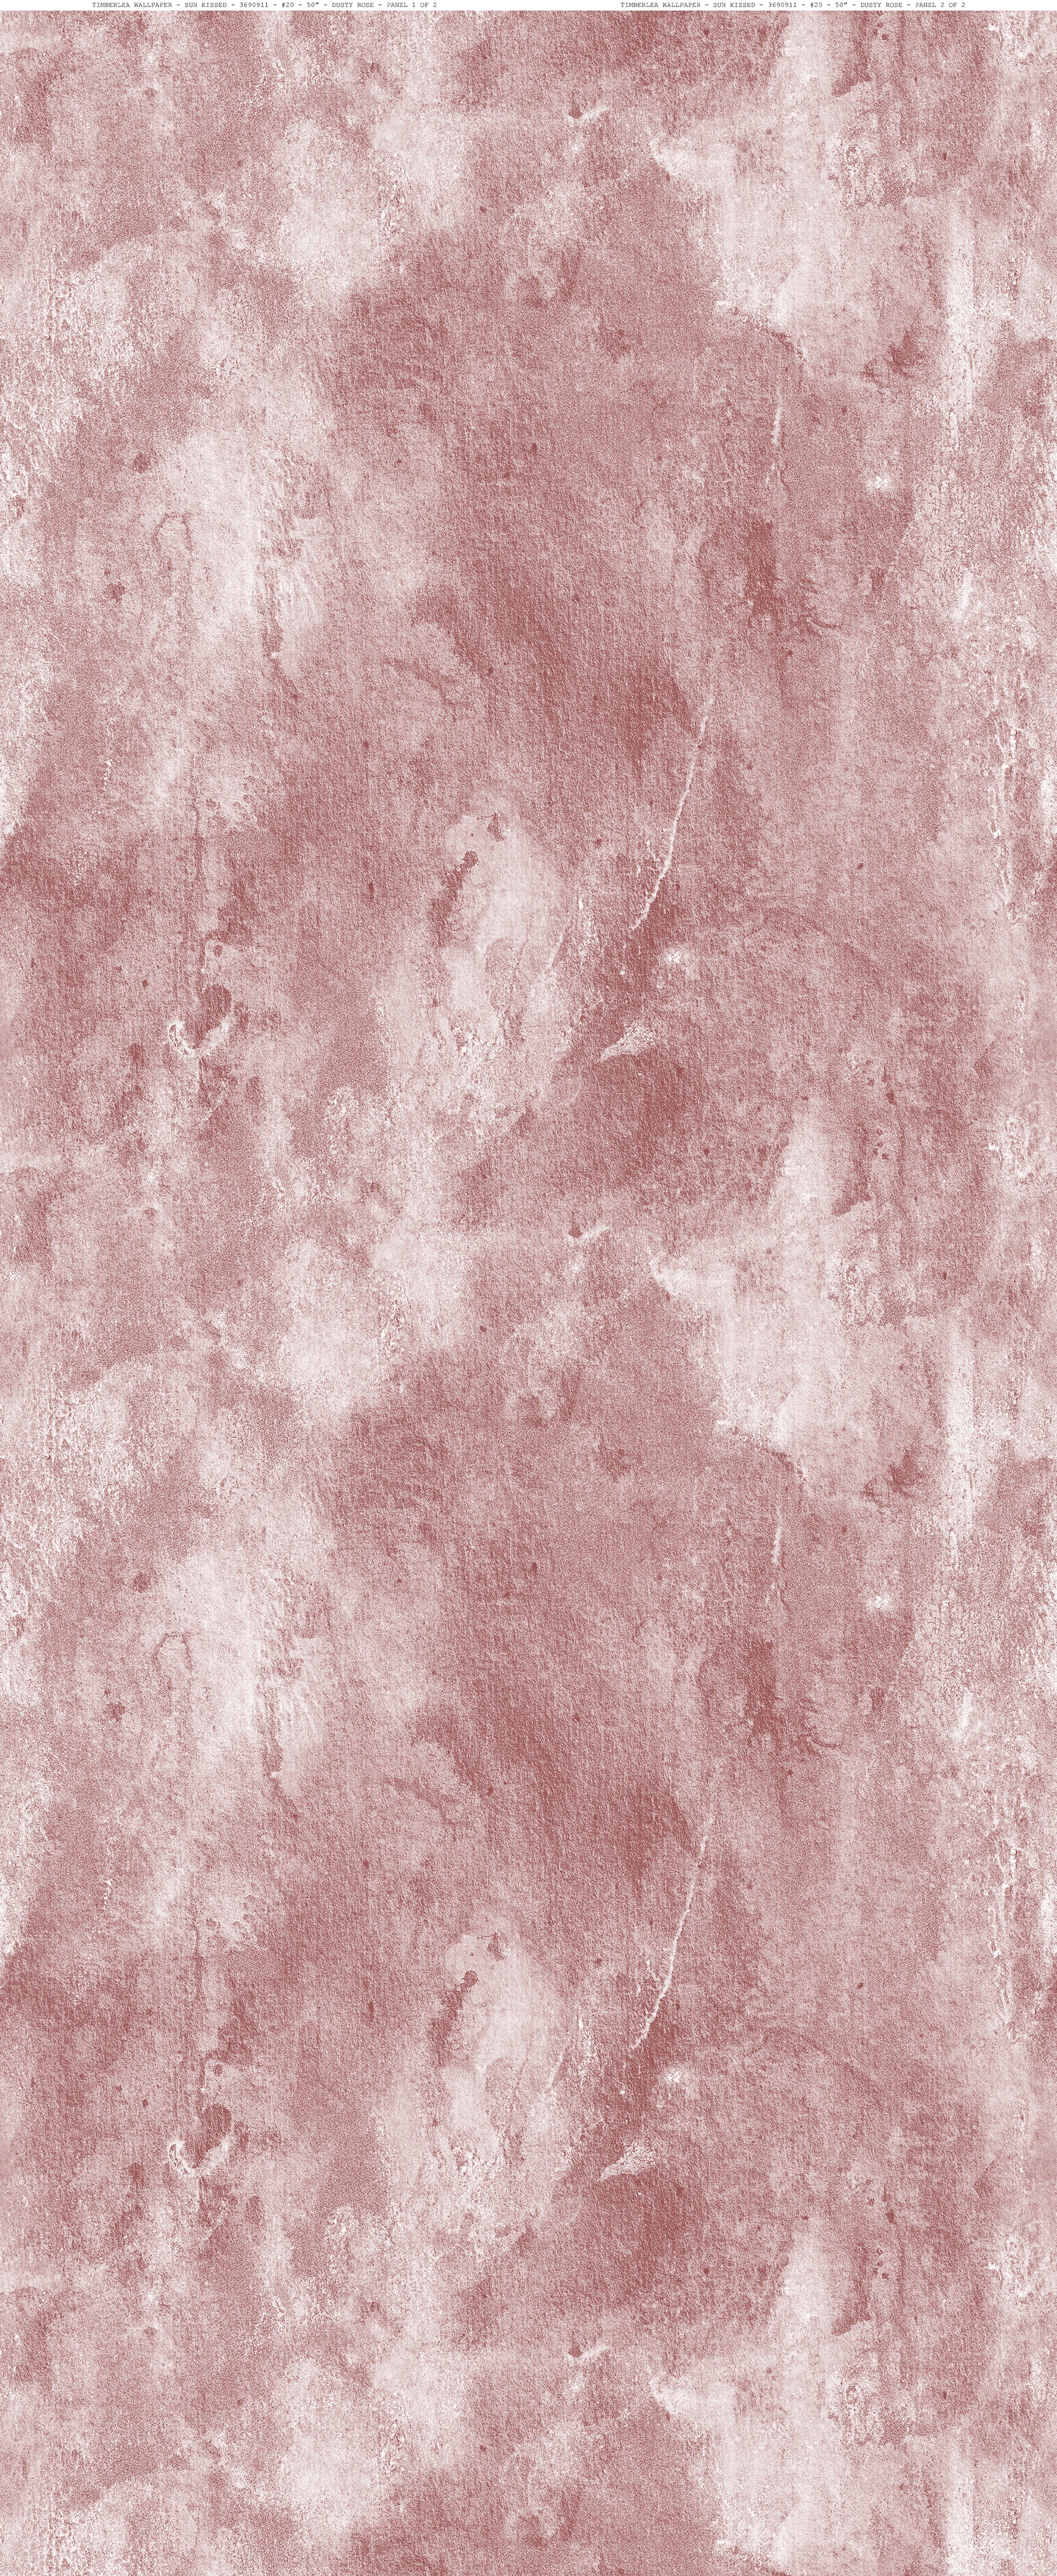 A textural close-up of the Dusty Rose Limewash Wallpaper, exhibiting a rich, velvety rose color with subtle variations and a plaster-like effect that exudes rustic elegance and warmth.